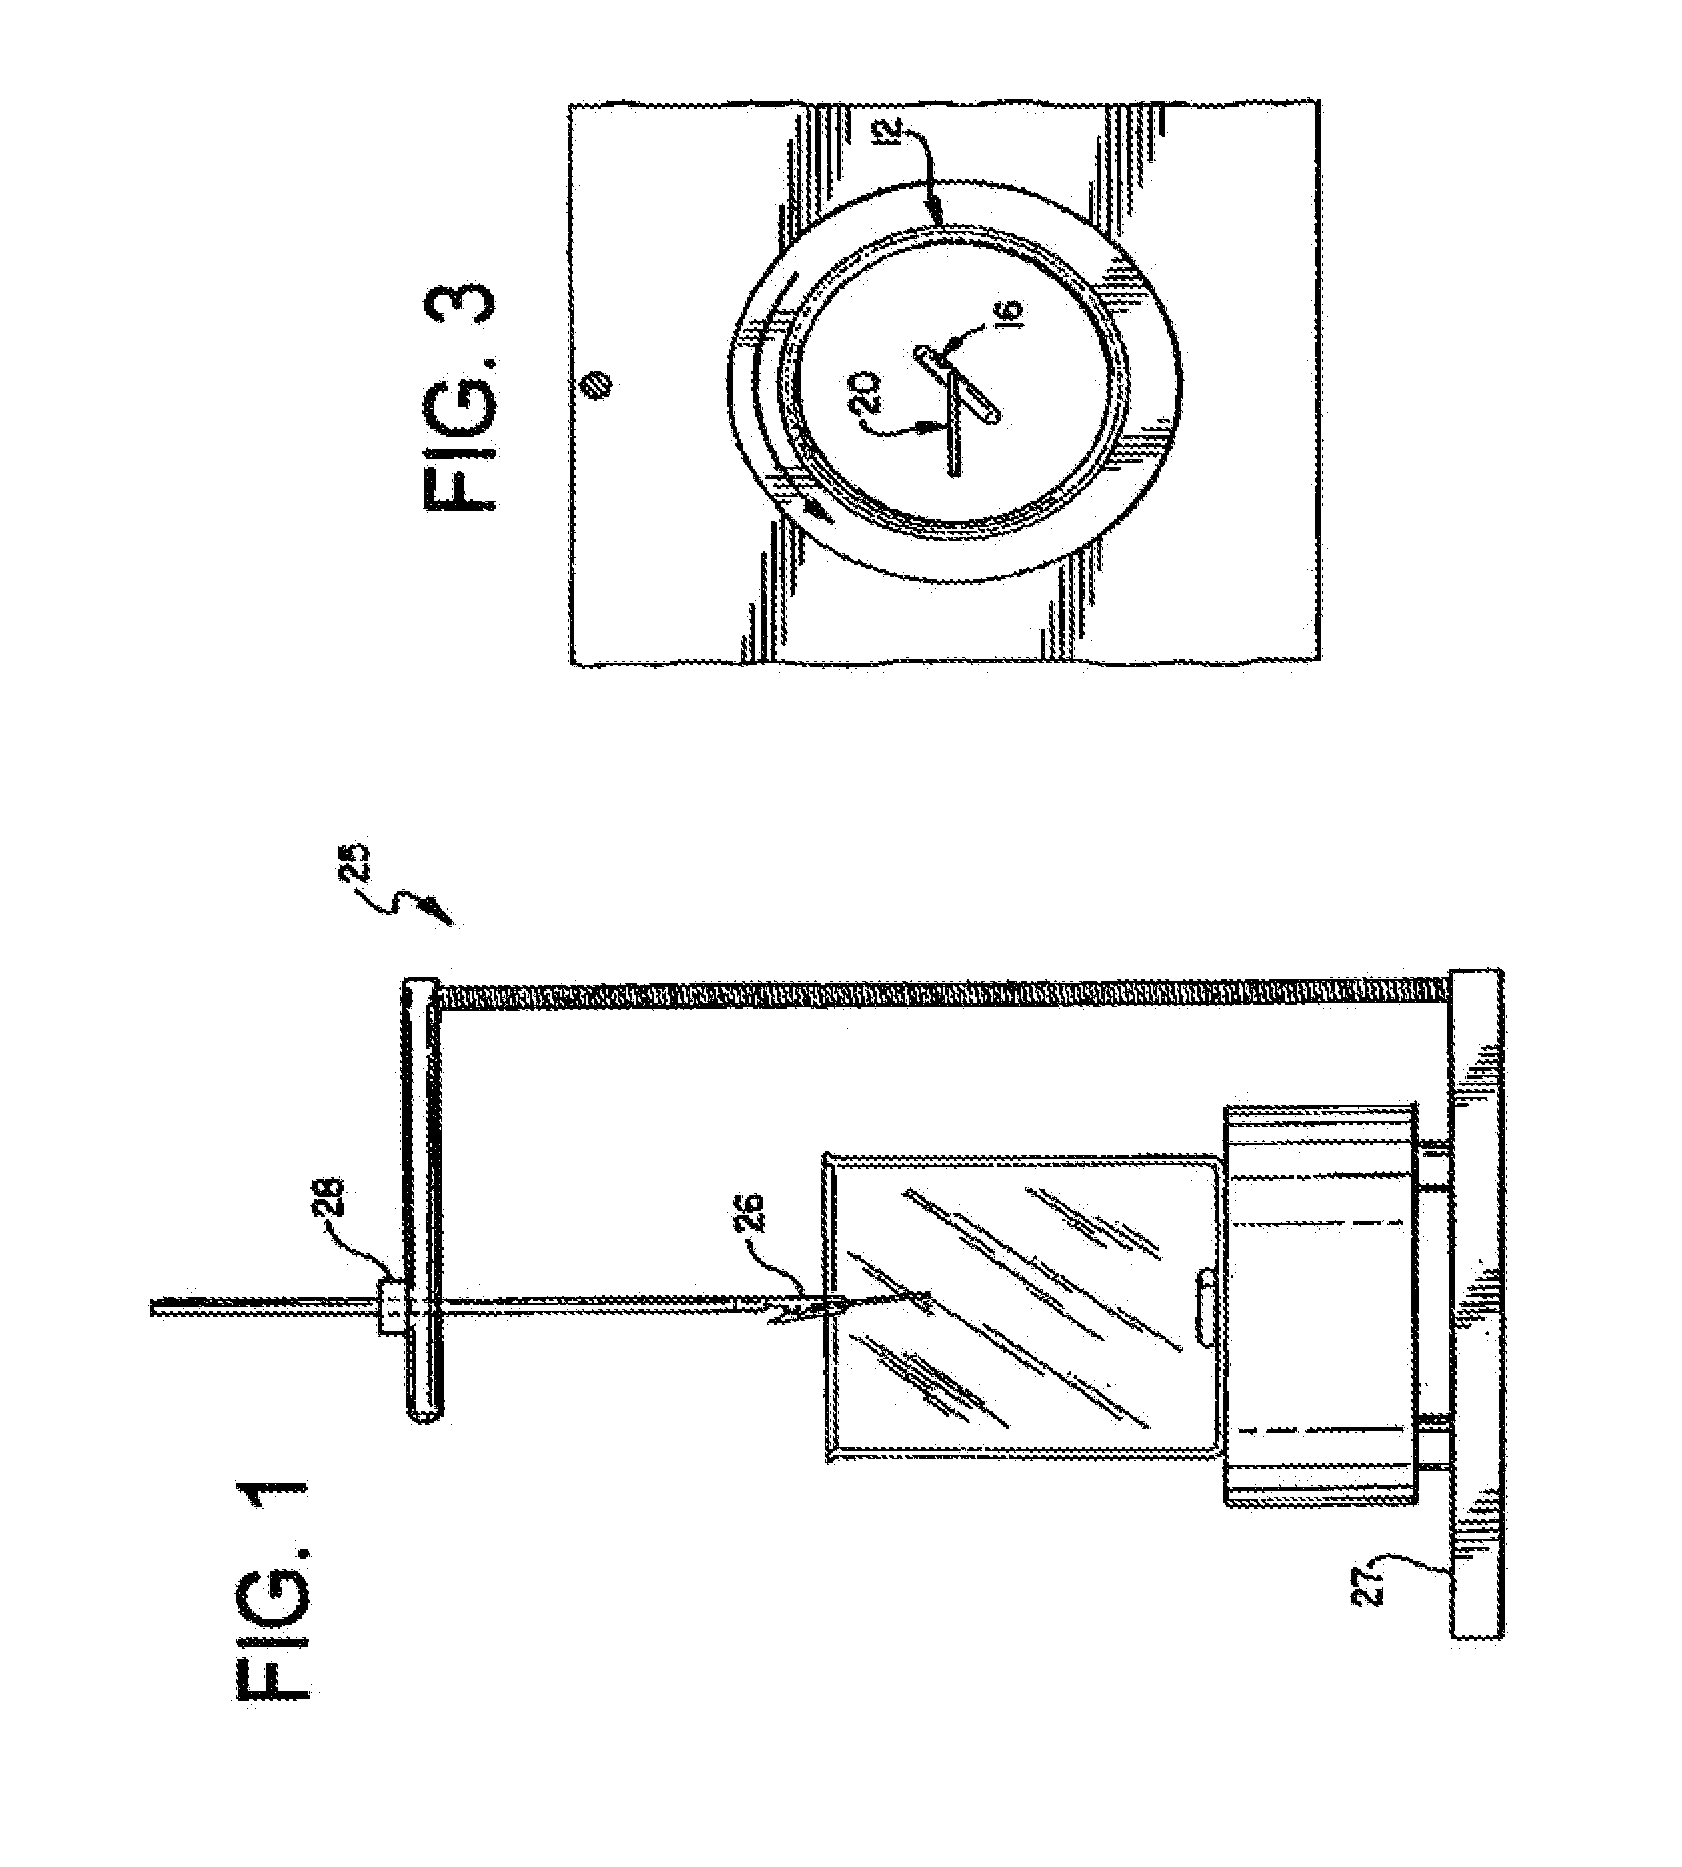 Water-soluble film having improved dissolution and stress properties, and packets made therefrom